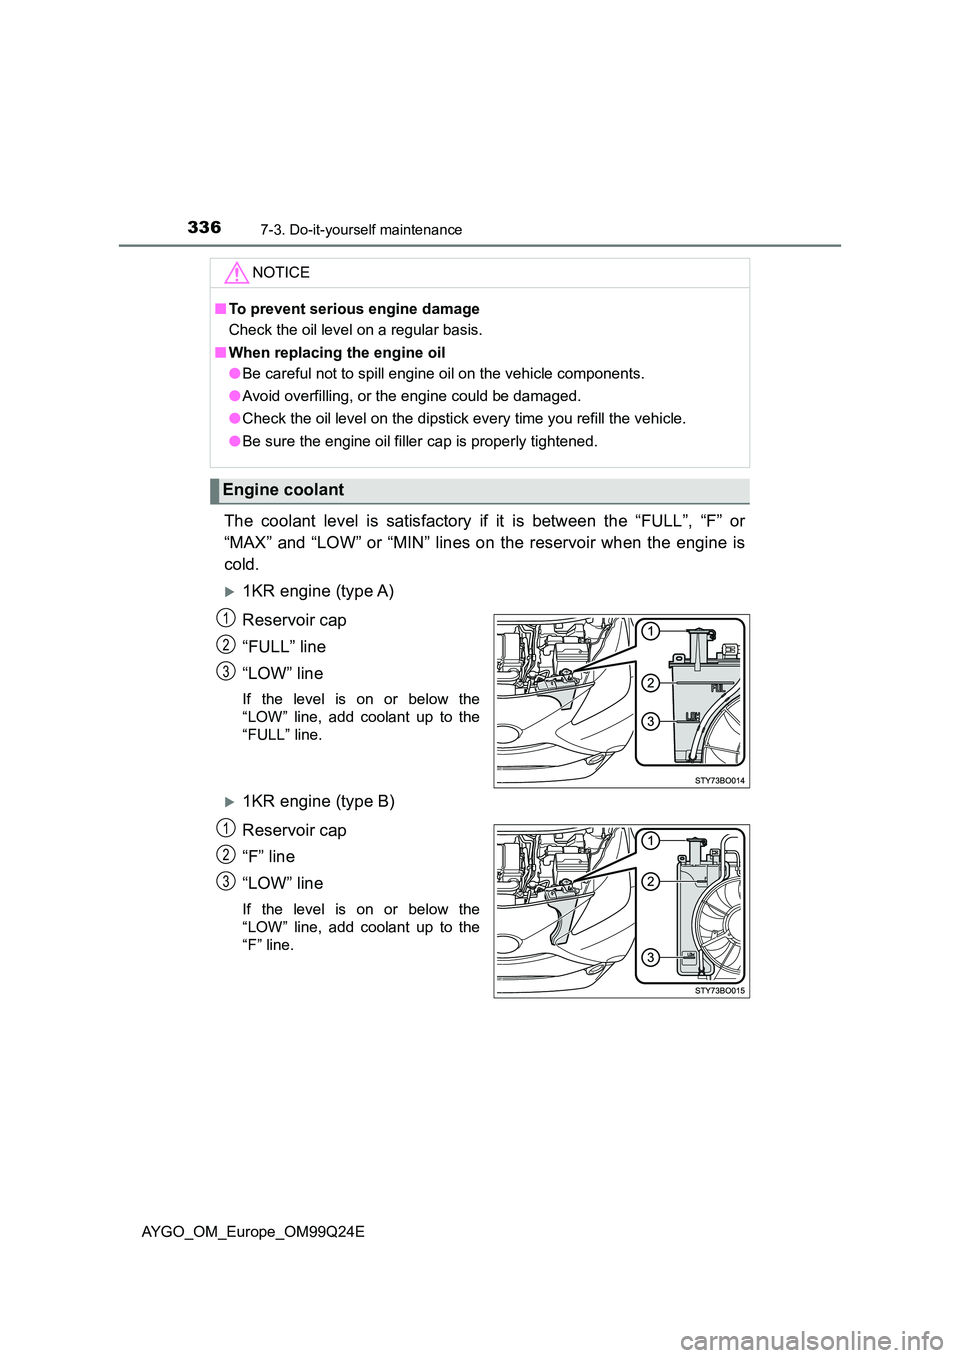 TOYOTA AYGO 2017  Owners Manual (in English) 3367-3. Do-it-yourself maintenance
AYGO_OM_Europe_OM99Q24E
The coolant level is satisfactory if it is between the “FULL”, “F” or 
“MAX” and “LOW” or “MIN” lines on the reservoir wh